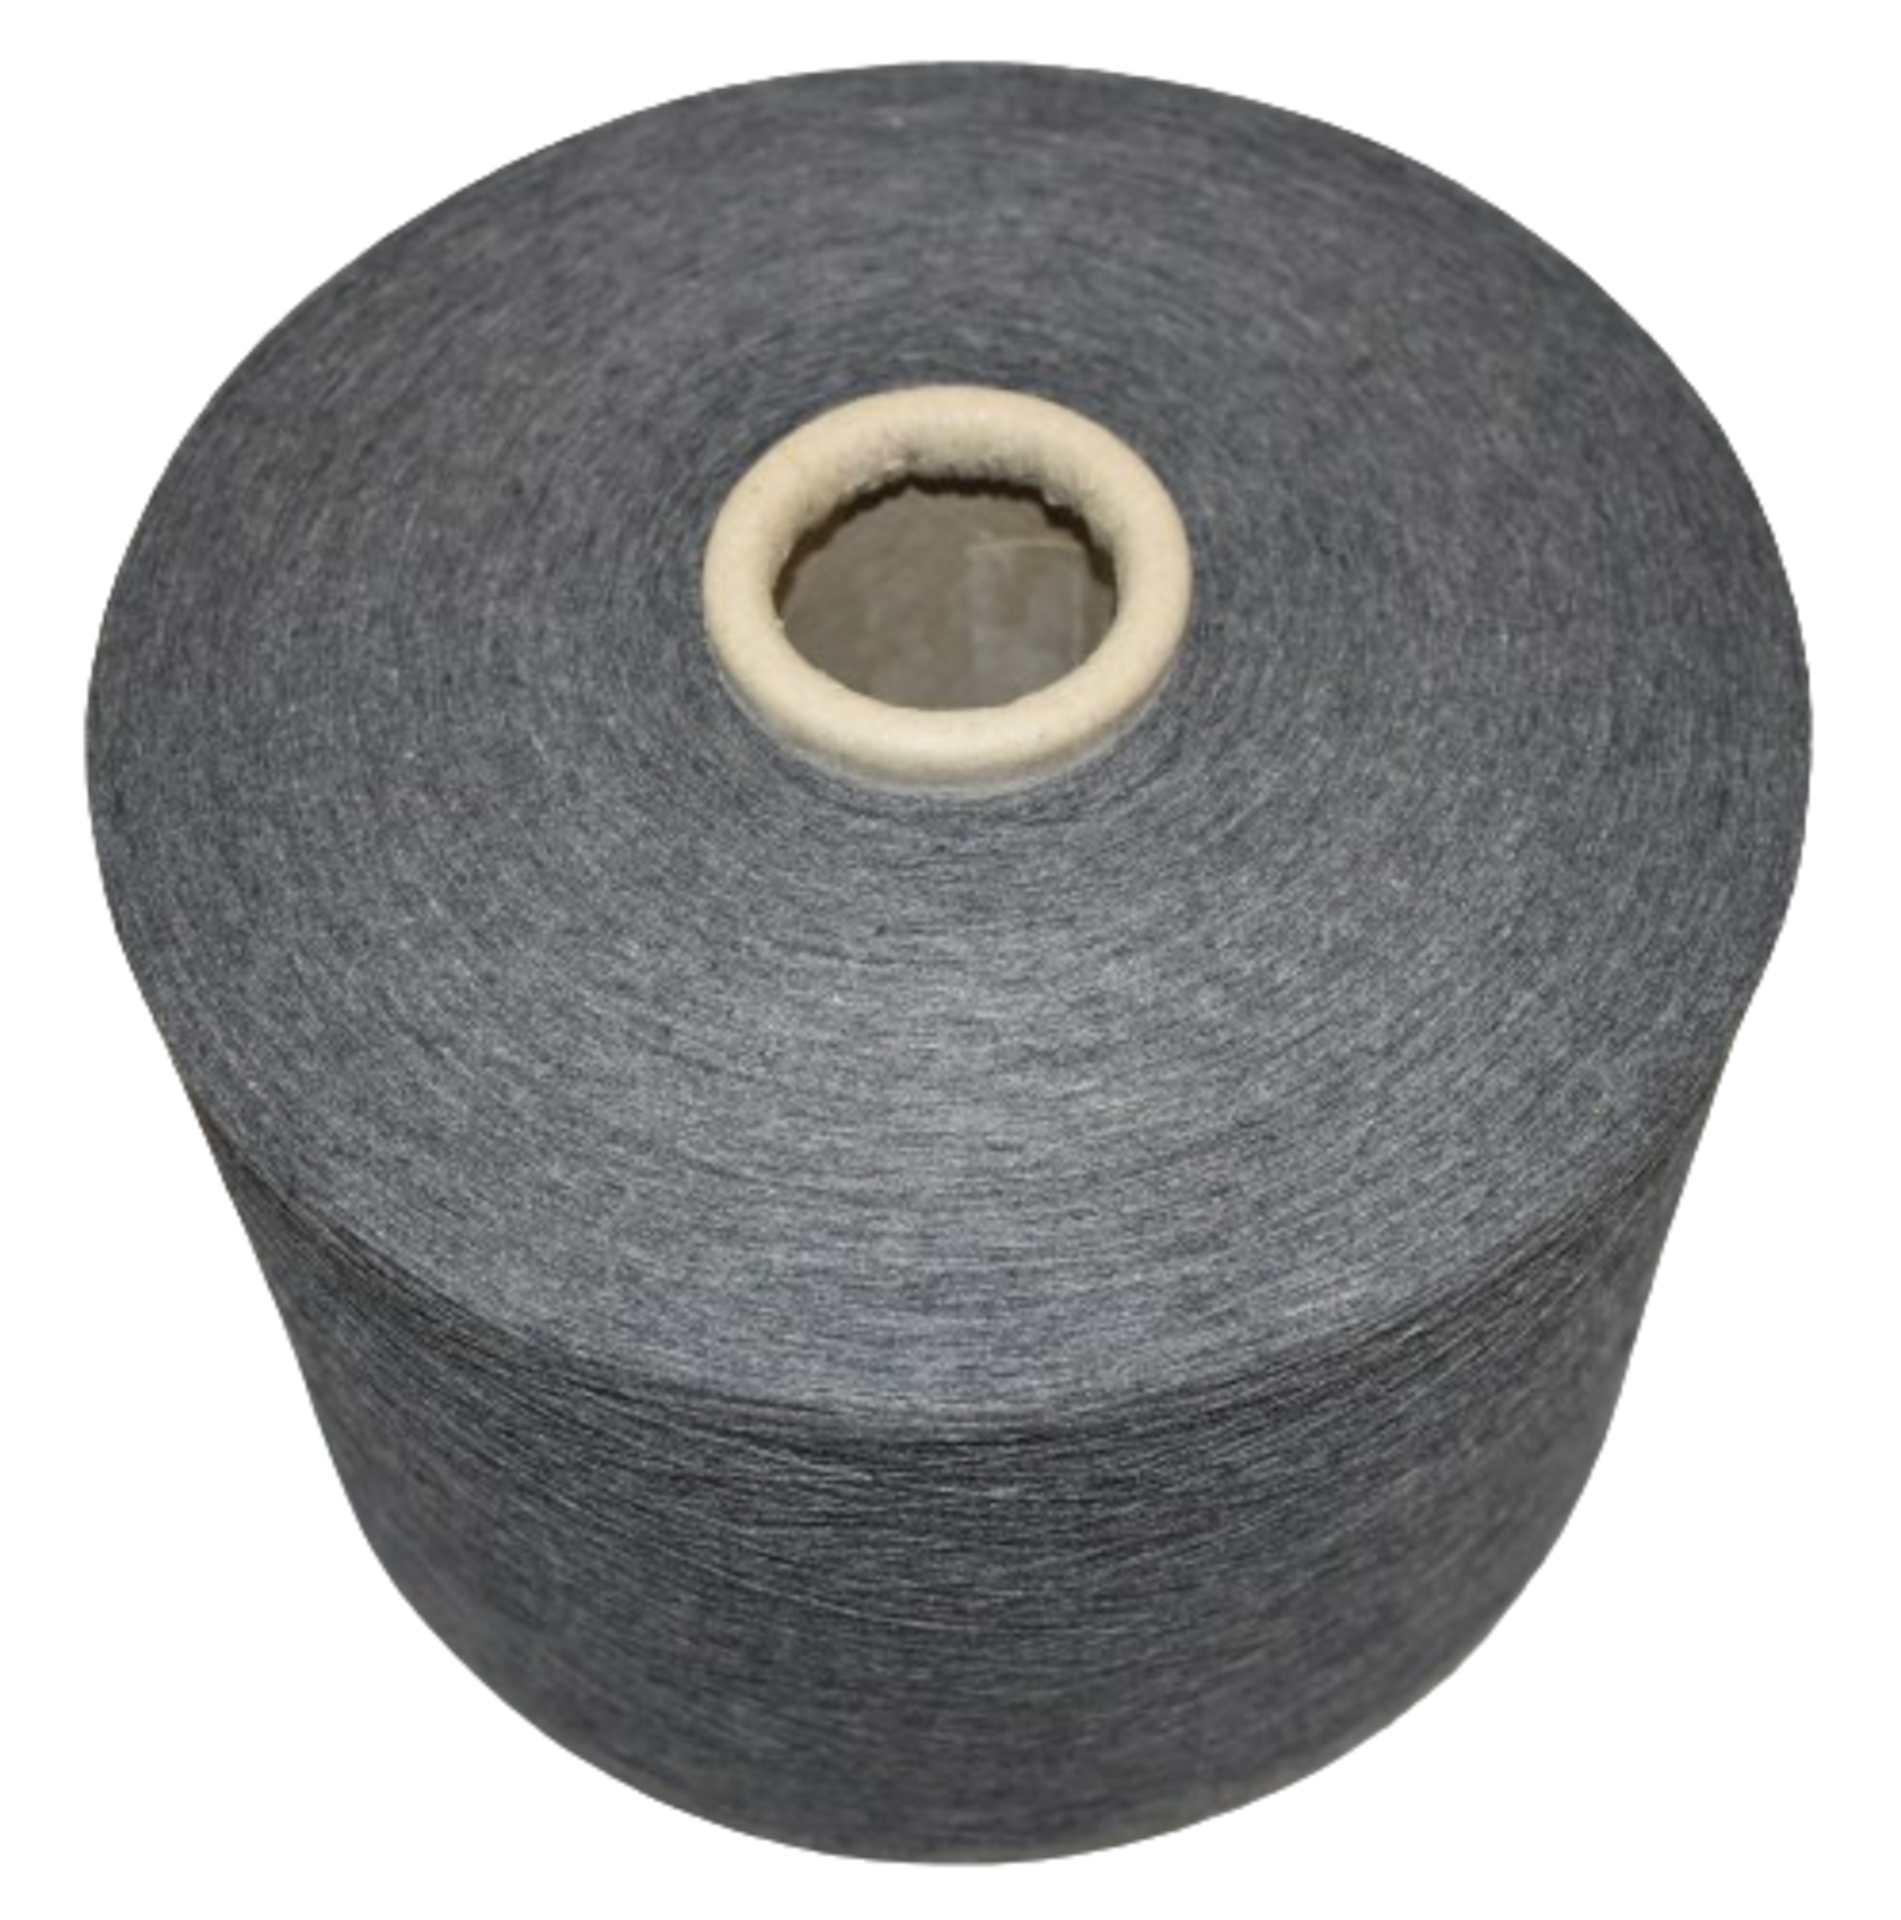 18 x Cones of 1/13 MicroCotton Knitting Yarn - Mid Grey - Approx Weight: 2,500g - New Stock ABL Yarn - Image 2 of 11